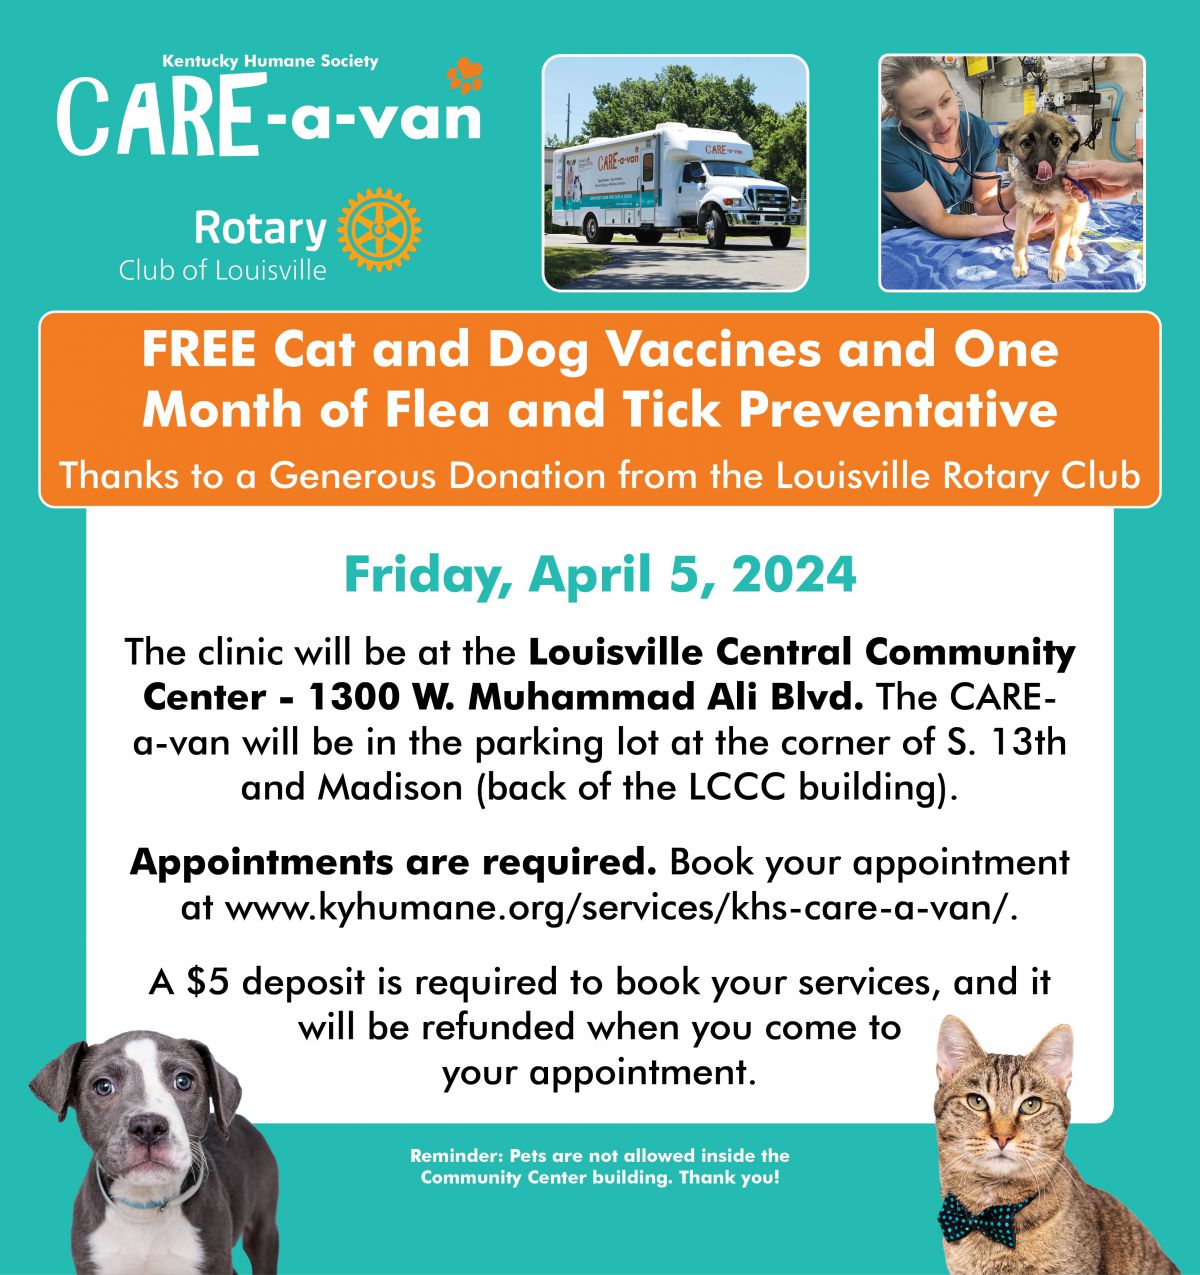 KHS CARE-a-van day at LCCC